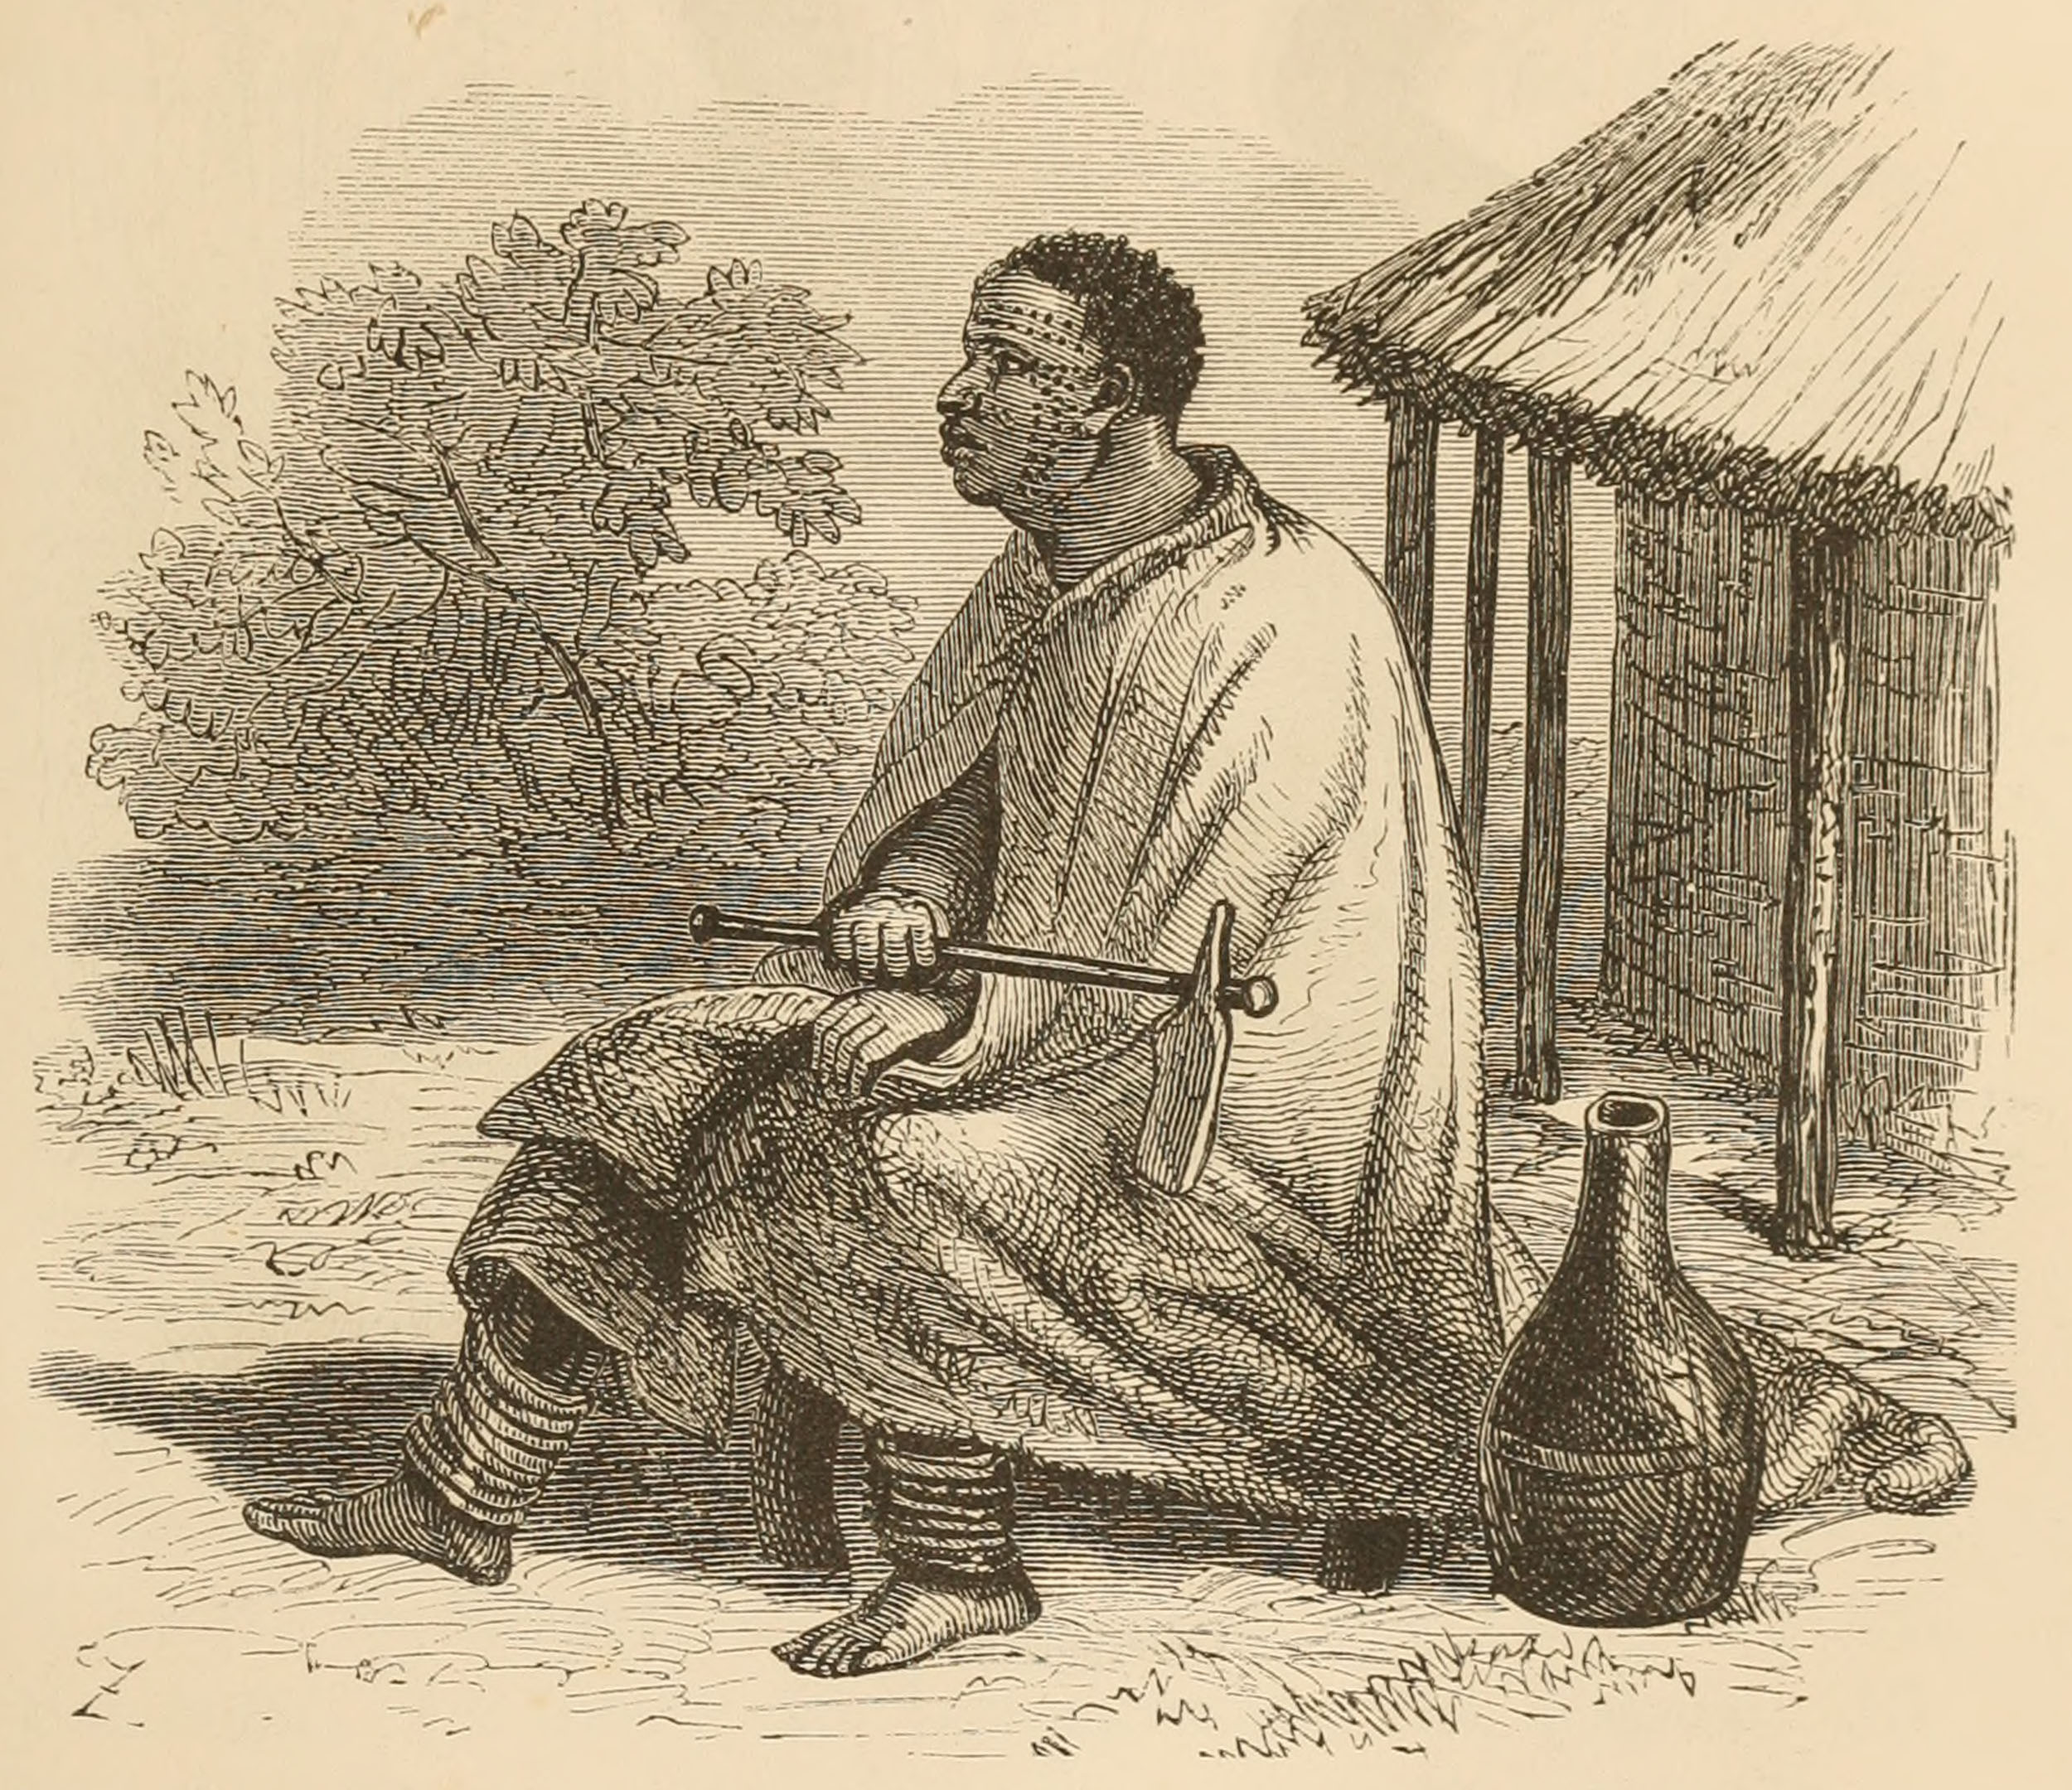 Chitapangwe. Illustration from the Last Journals (Livingstone 1874,1:185). Courtesy of Internet Archive